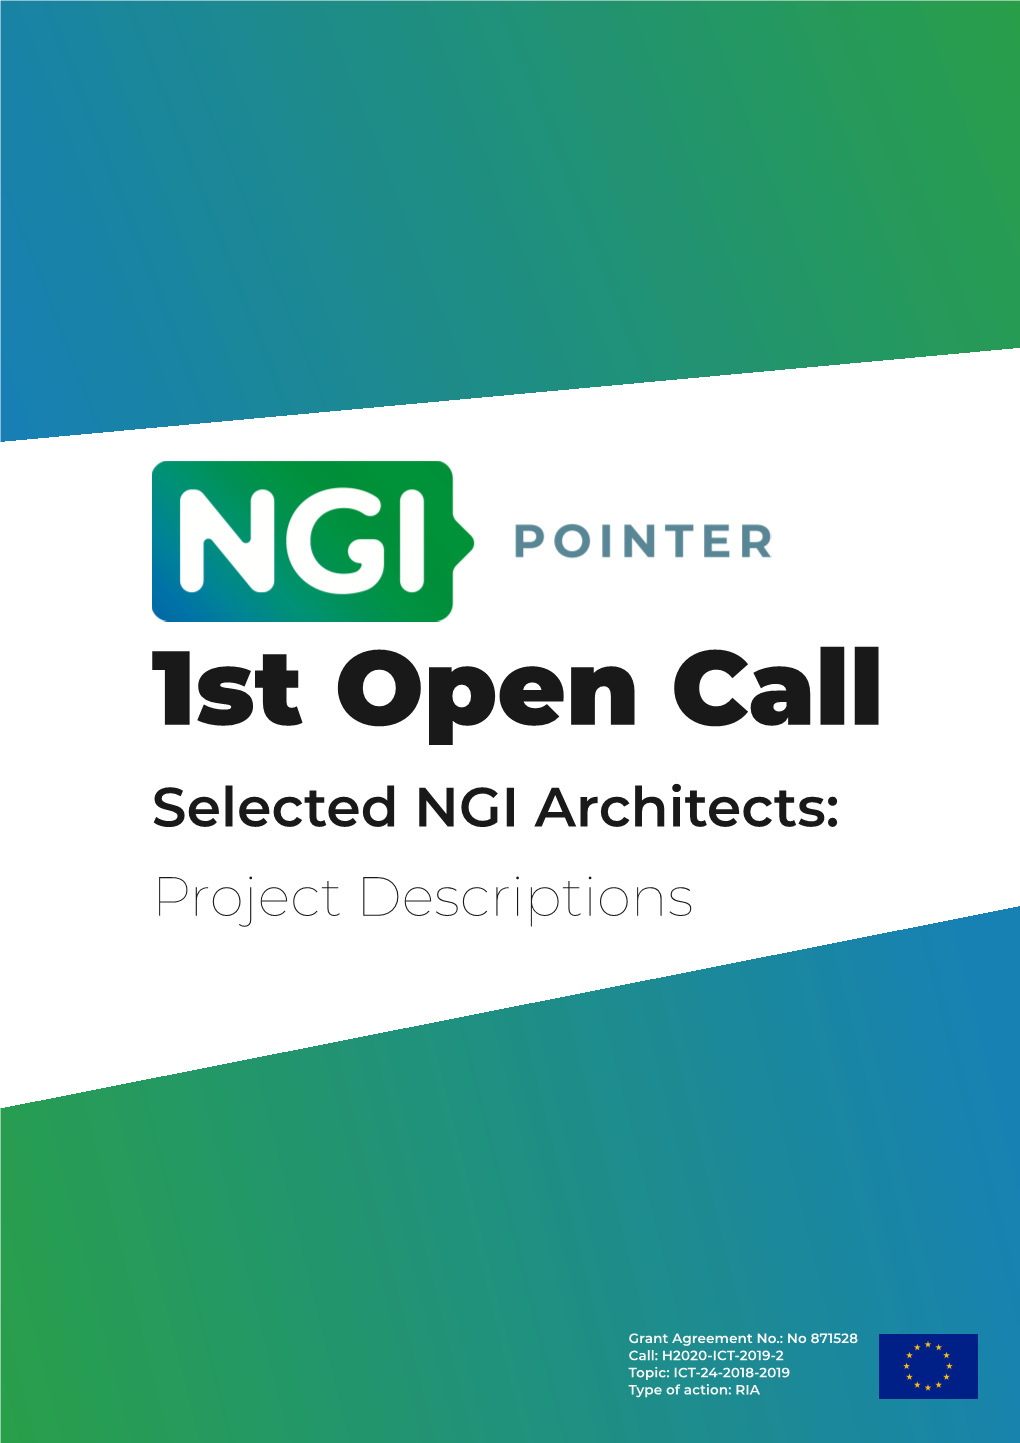 Download the NGI Pointer Architects Booklet